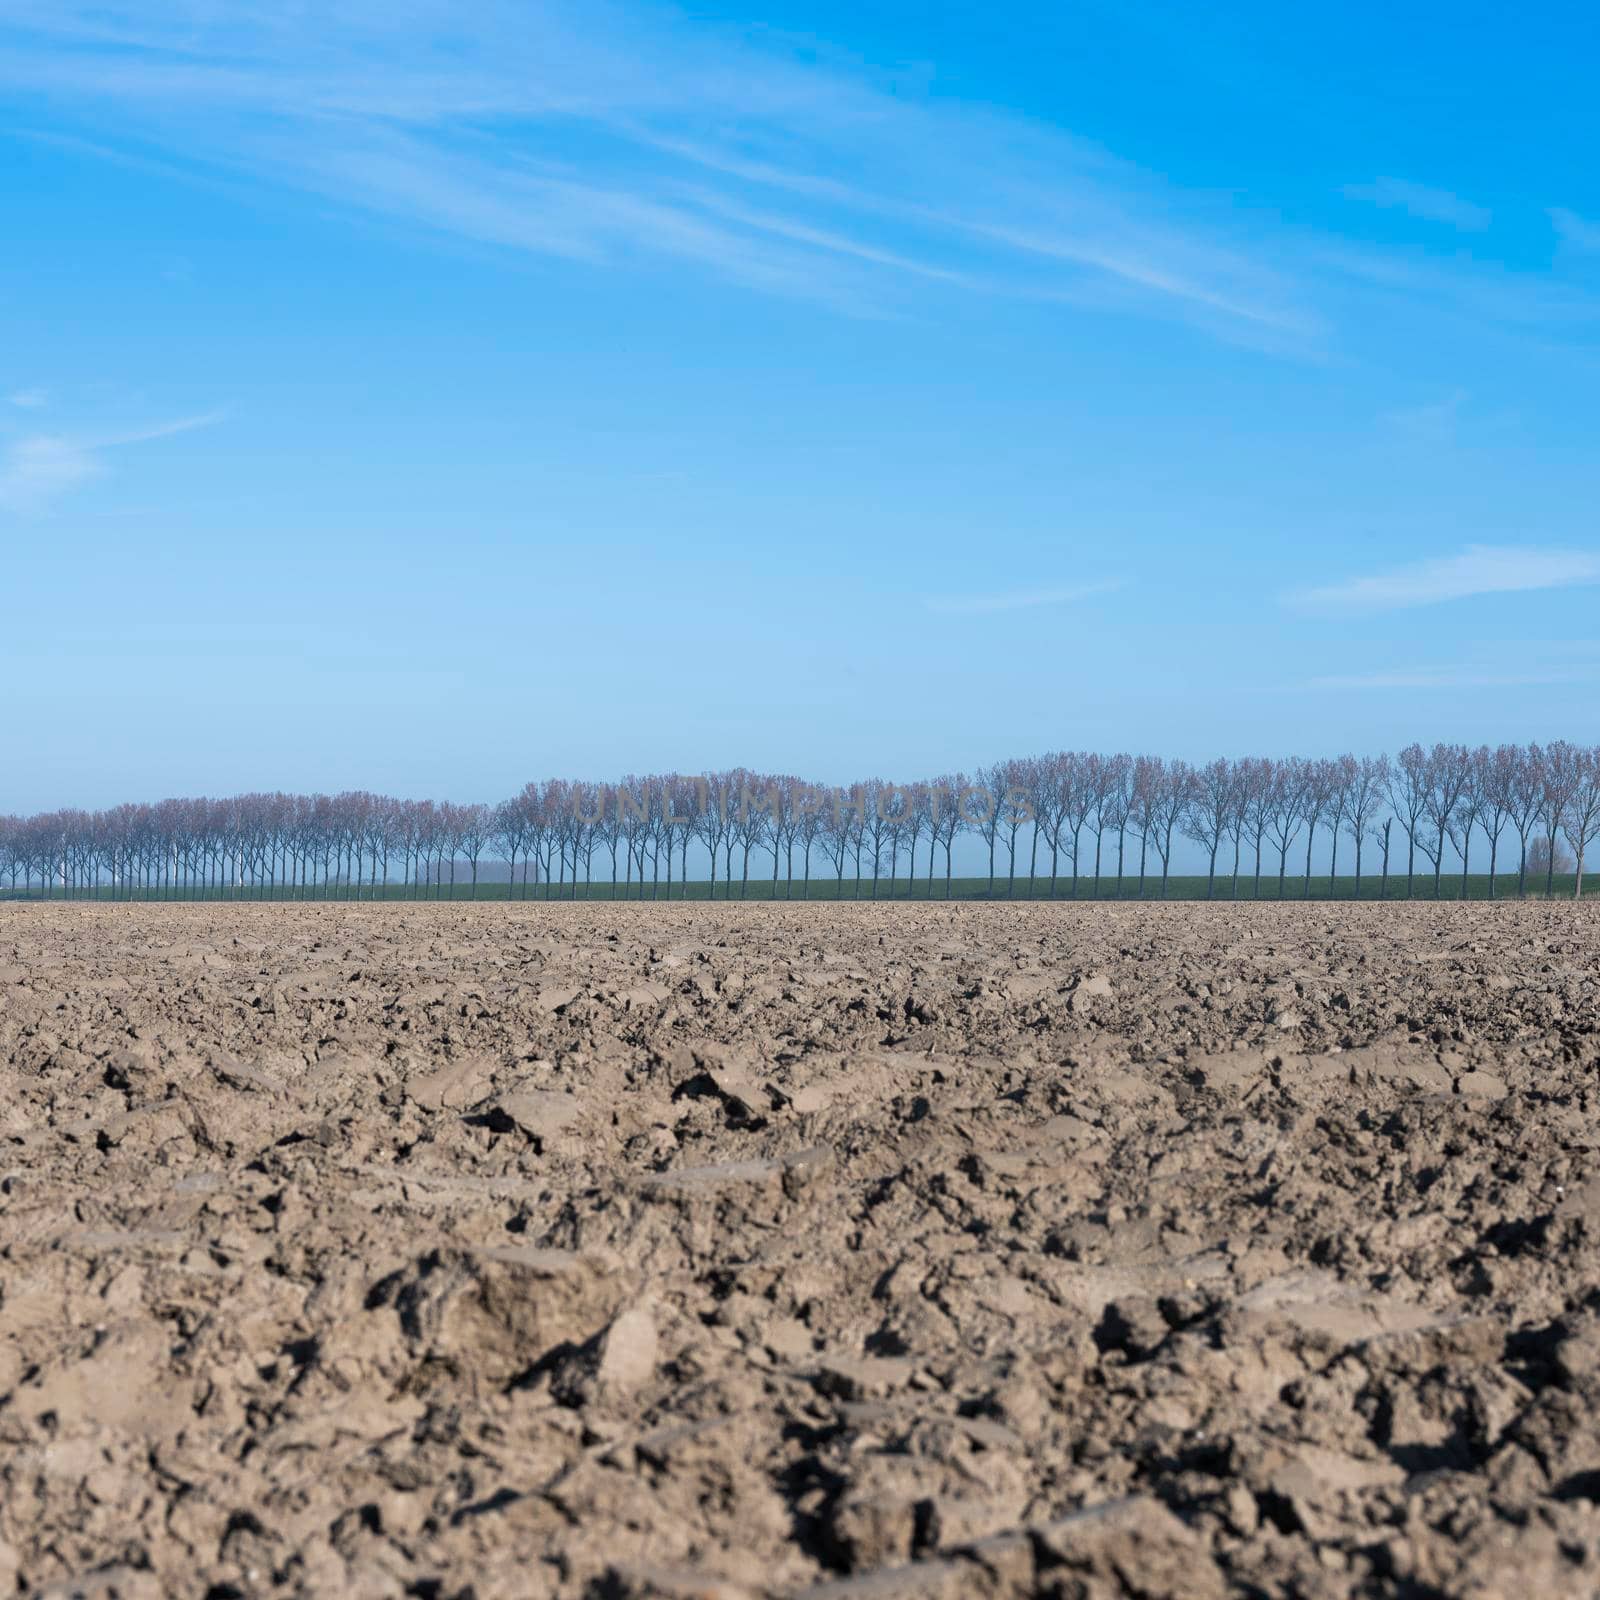 freshly plowed field and tree line early spring in the netherlands on the island of goeree en overflakkee